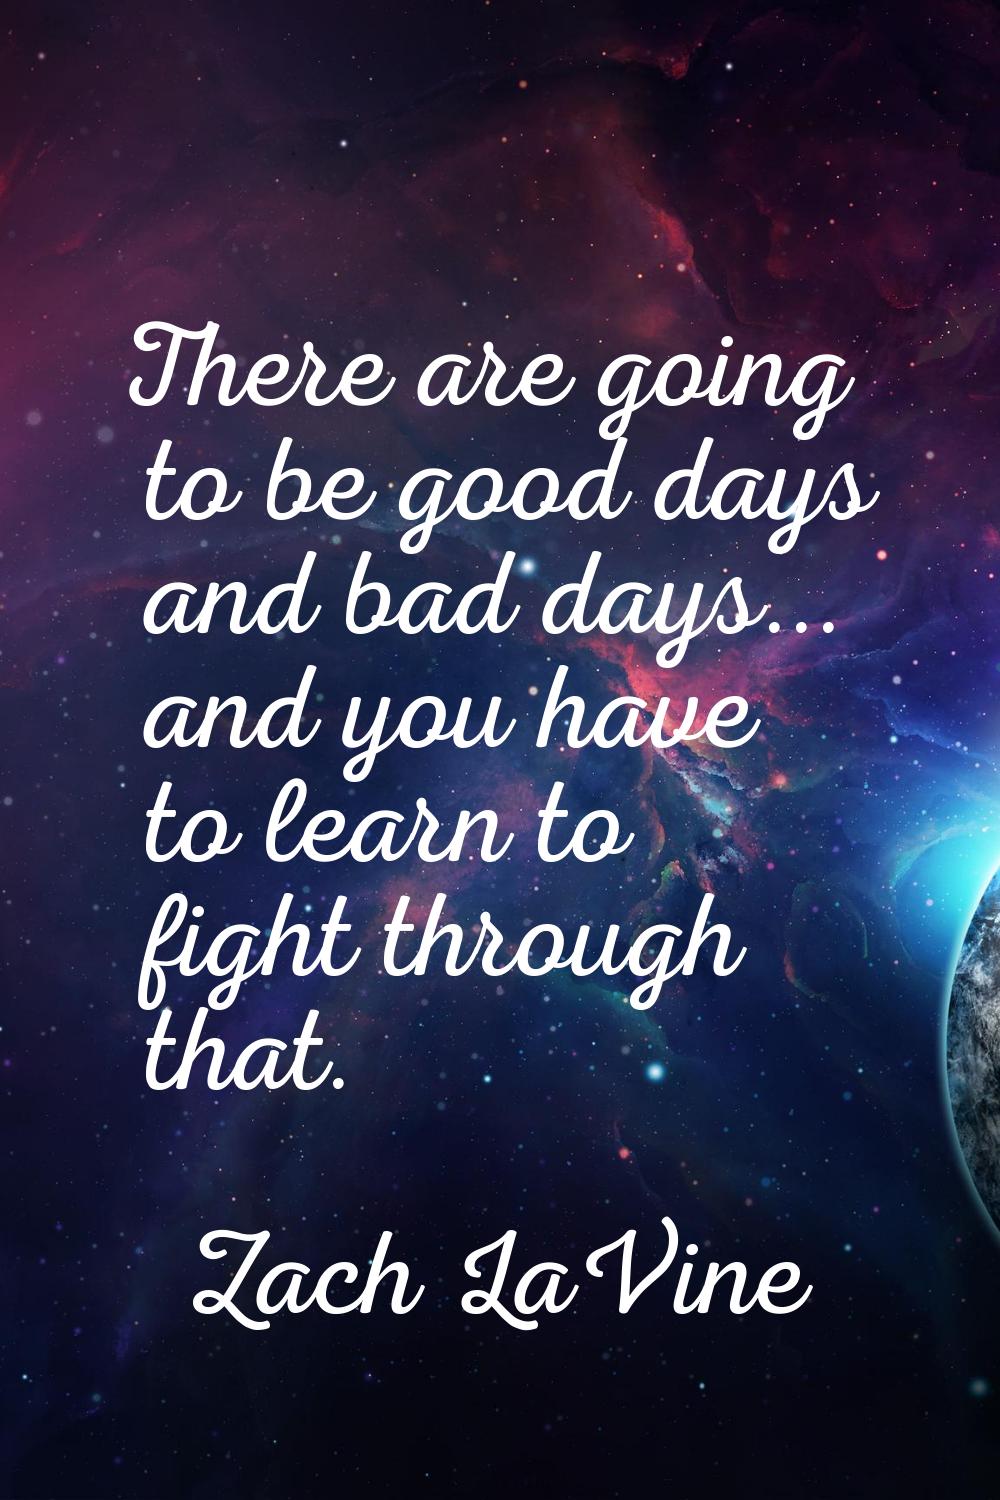 There are going to be good days and bad days... and you have to learn to fight through that.